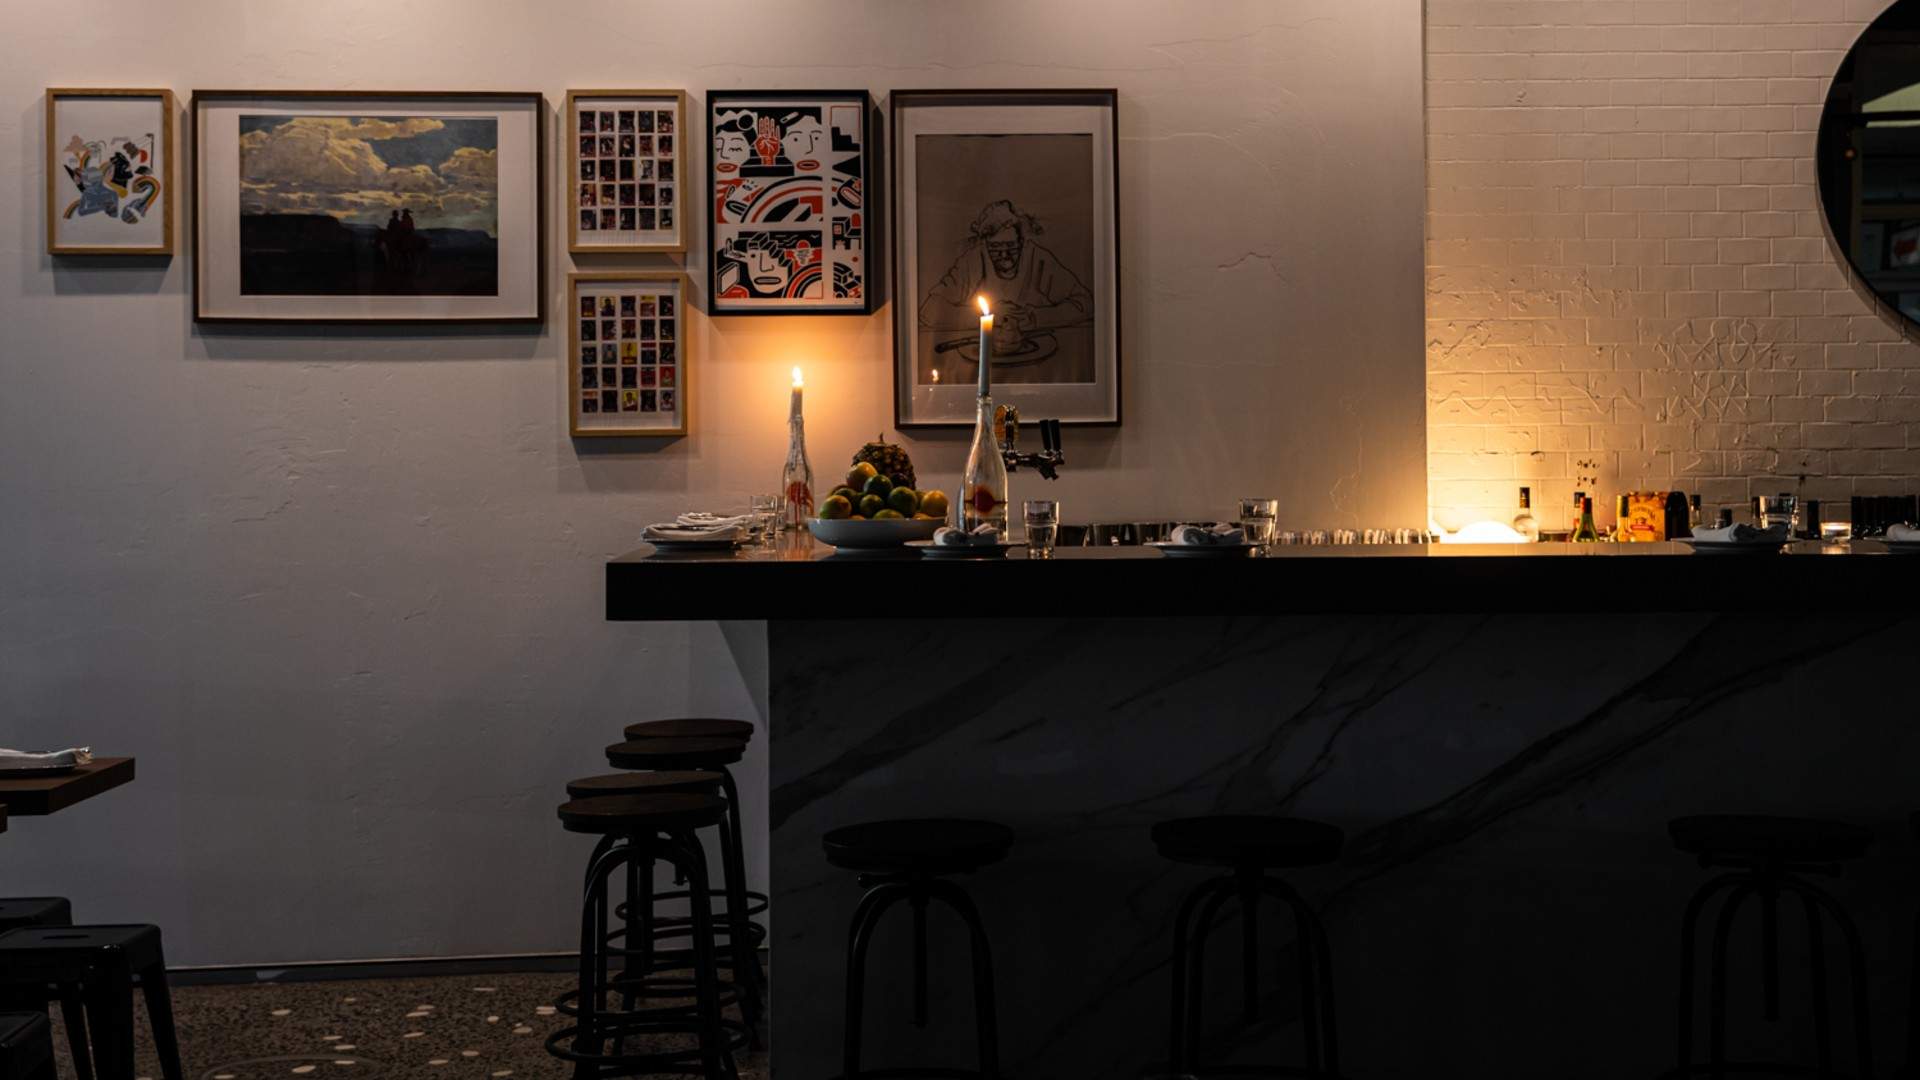 Bar Suze Is Surry Hills' New Late-Night Bar Serving Swedish Snacks and House-Made Apple Wine